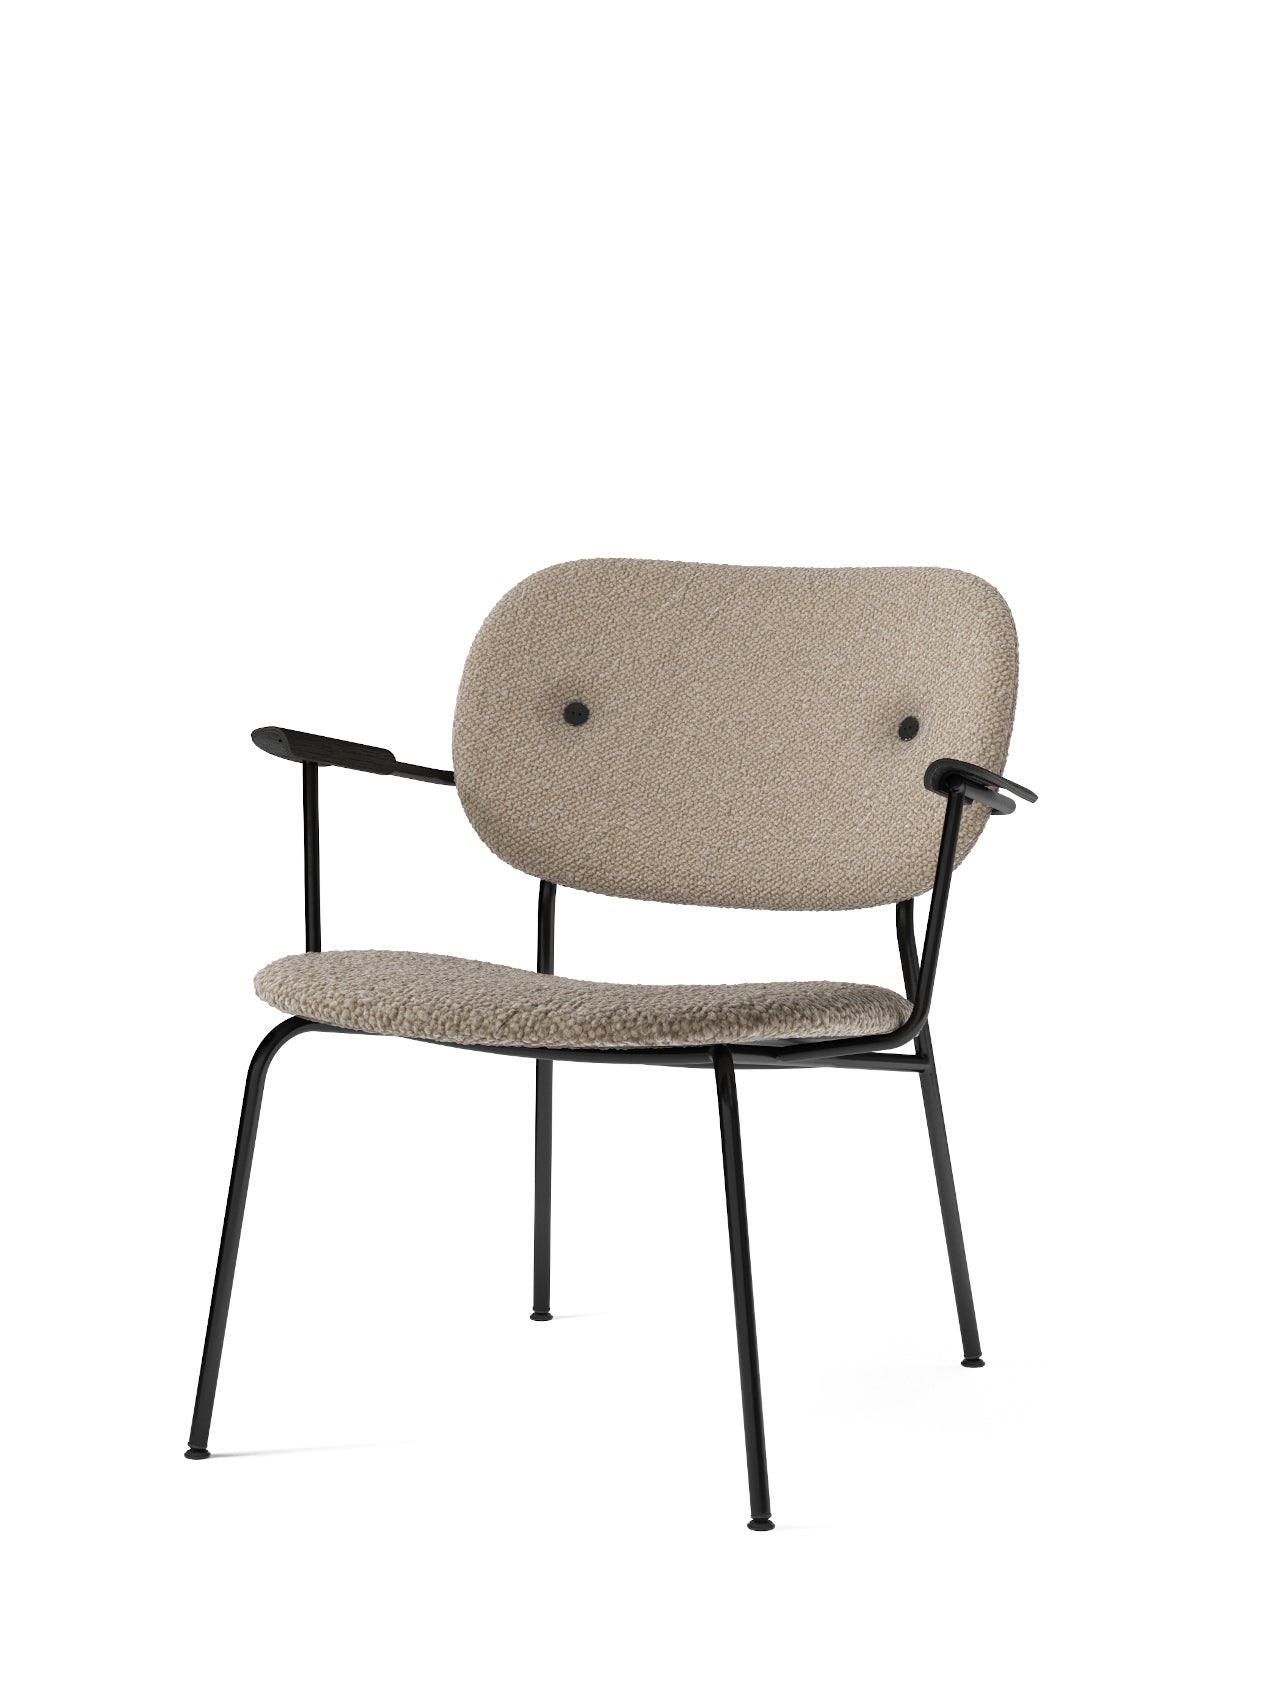 Co Lounge Chair, Fully Upholstered